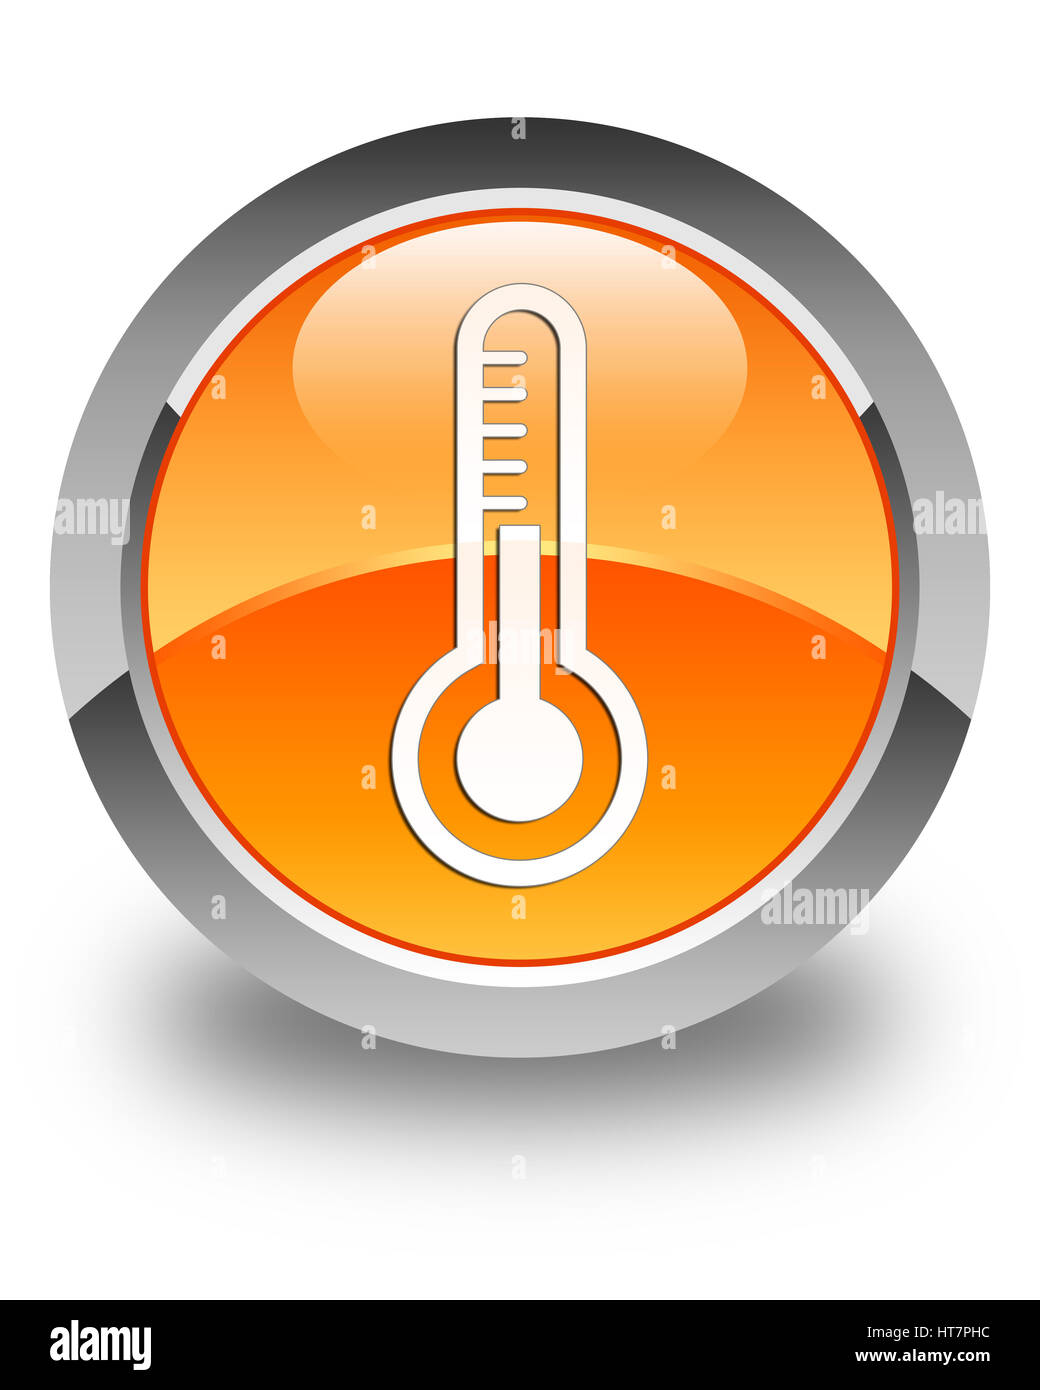 https://c8.alamy.com/comp/HT7PHC/thermometer-icon-isolated-on-glossy-orange-round-button-abstract-illustration-HT7PHC.jpg